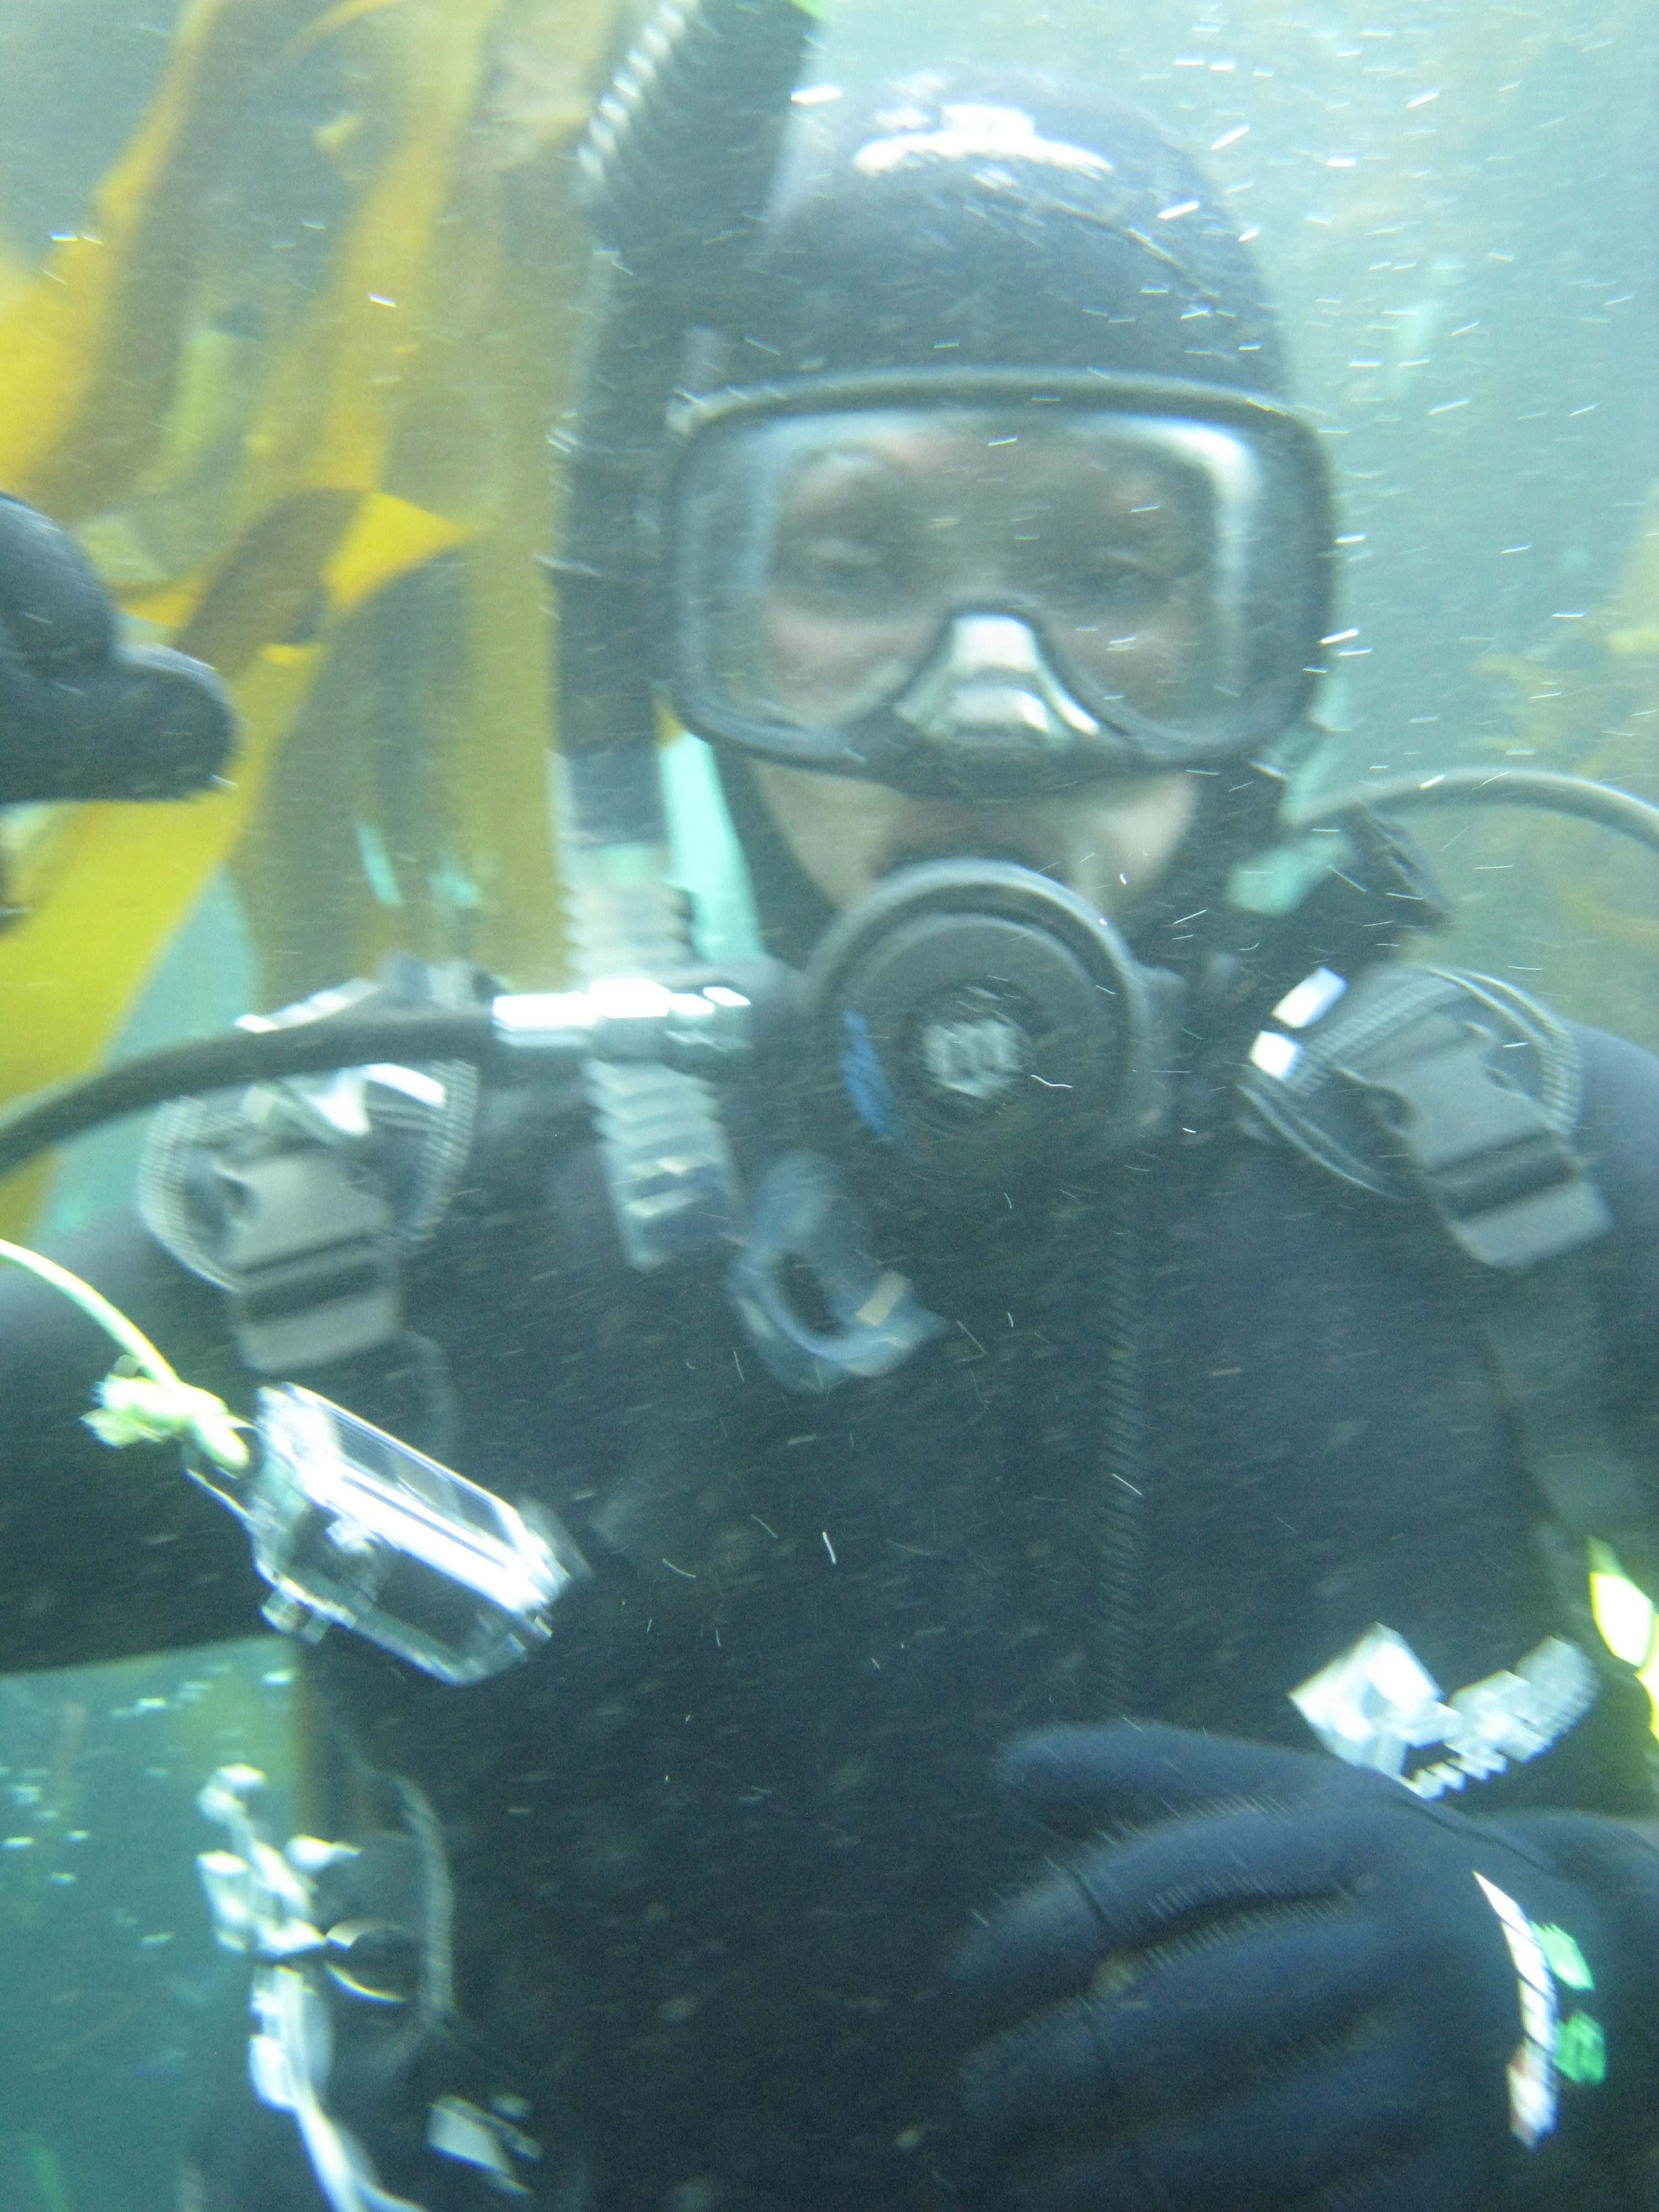 Not me on this dive...Sorry no camera. But me in similar cold water gear. Though my gloves are no were near this impressive.